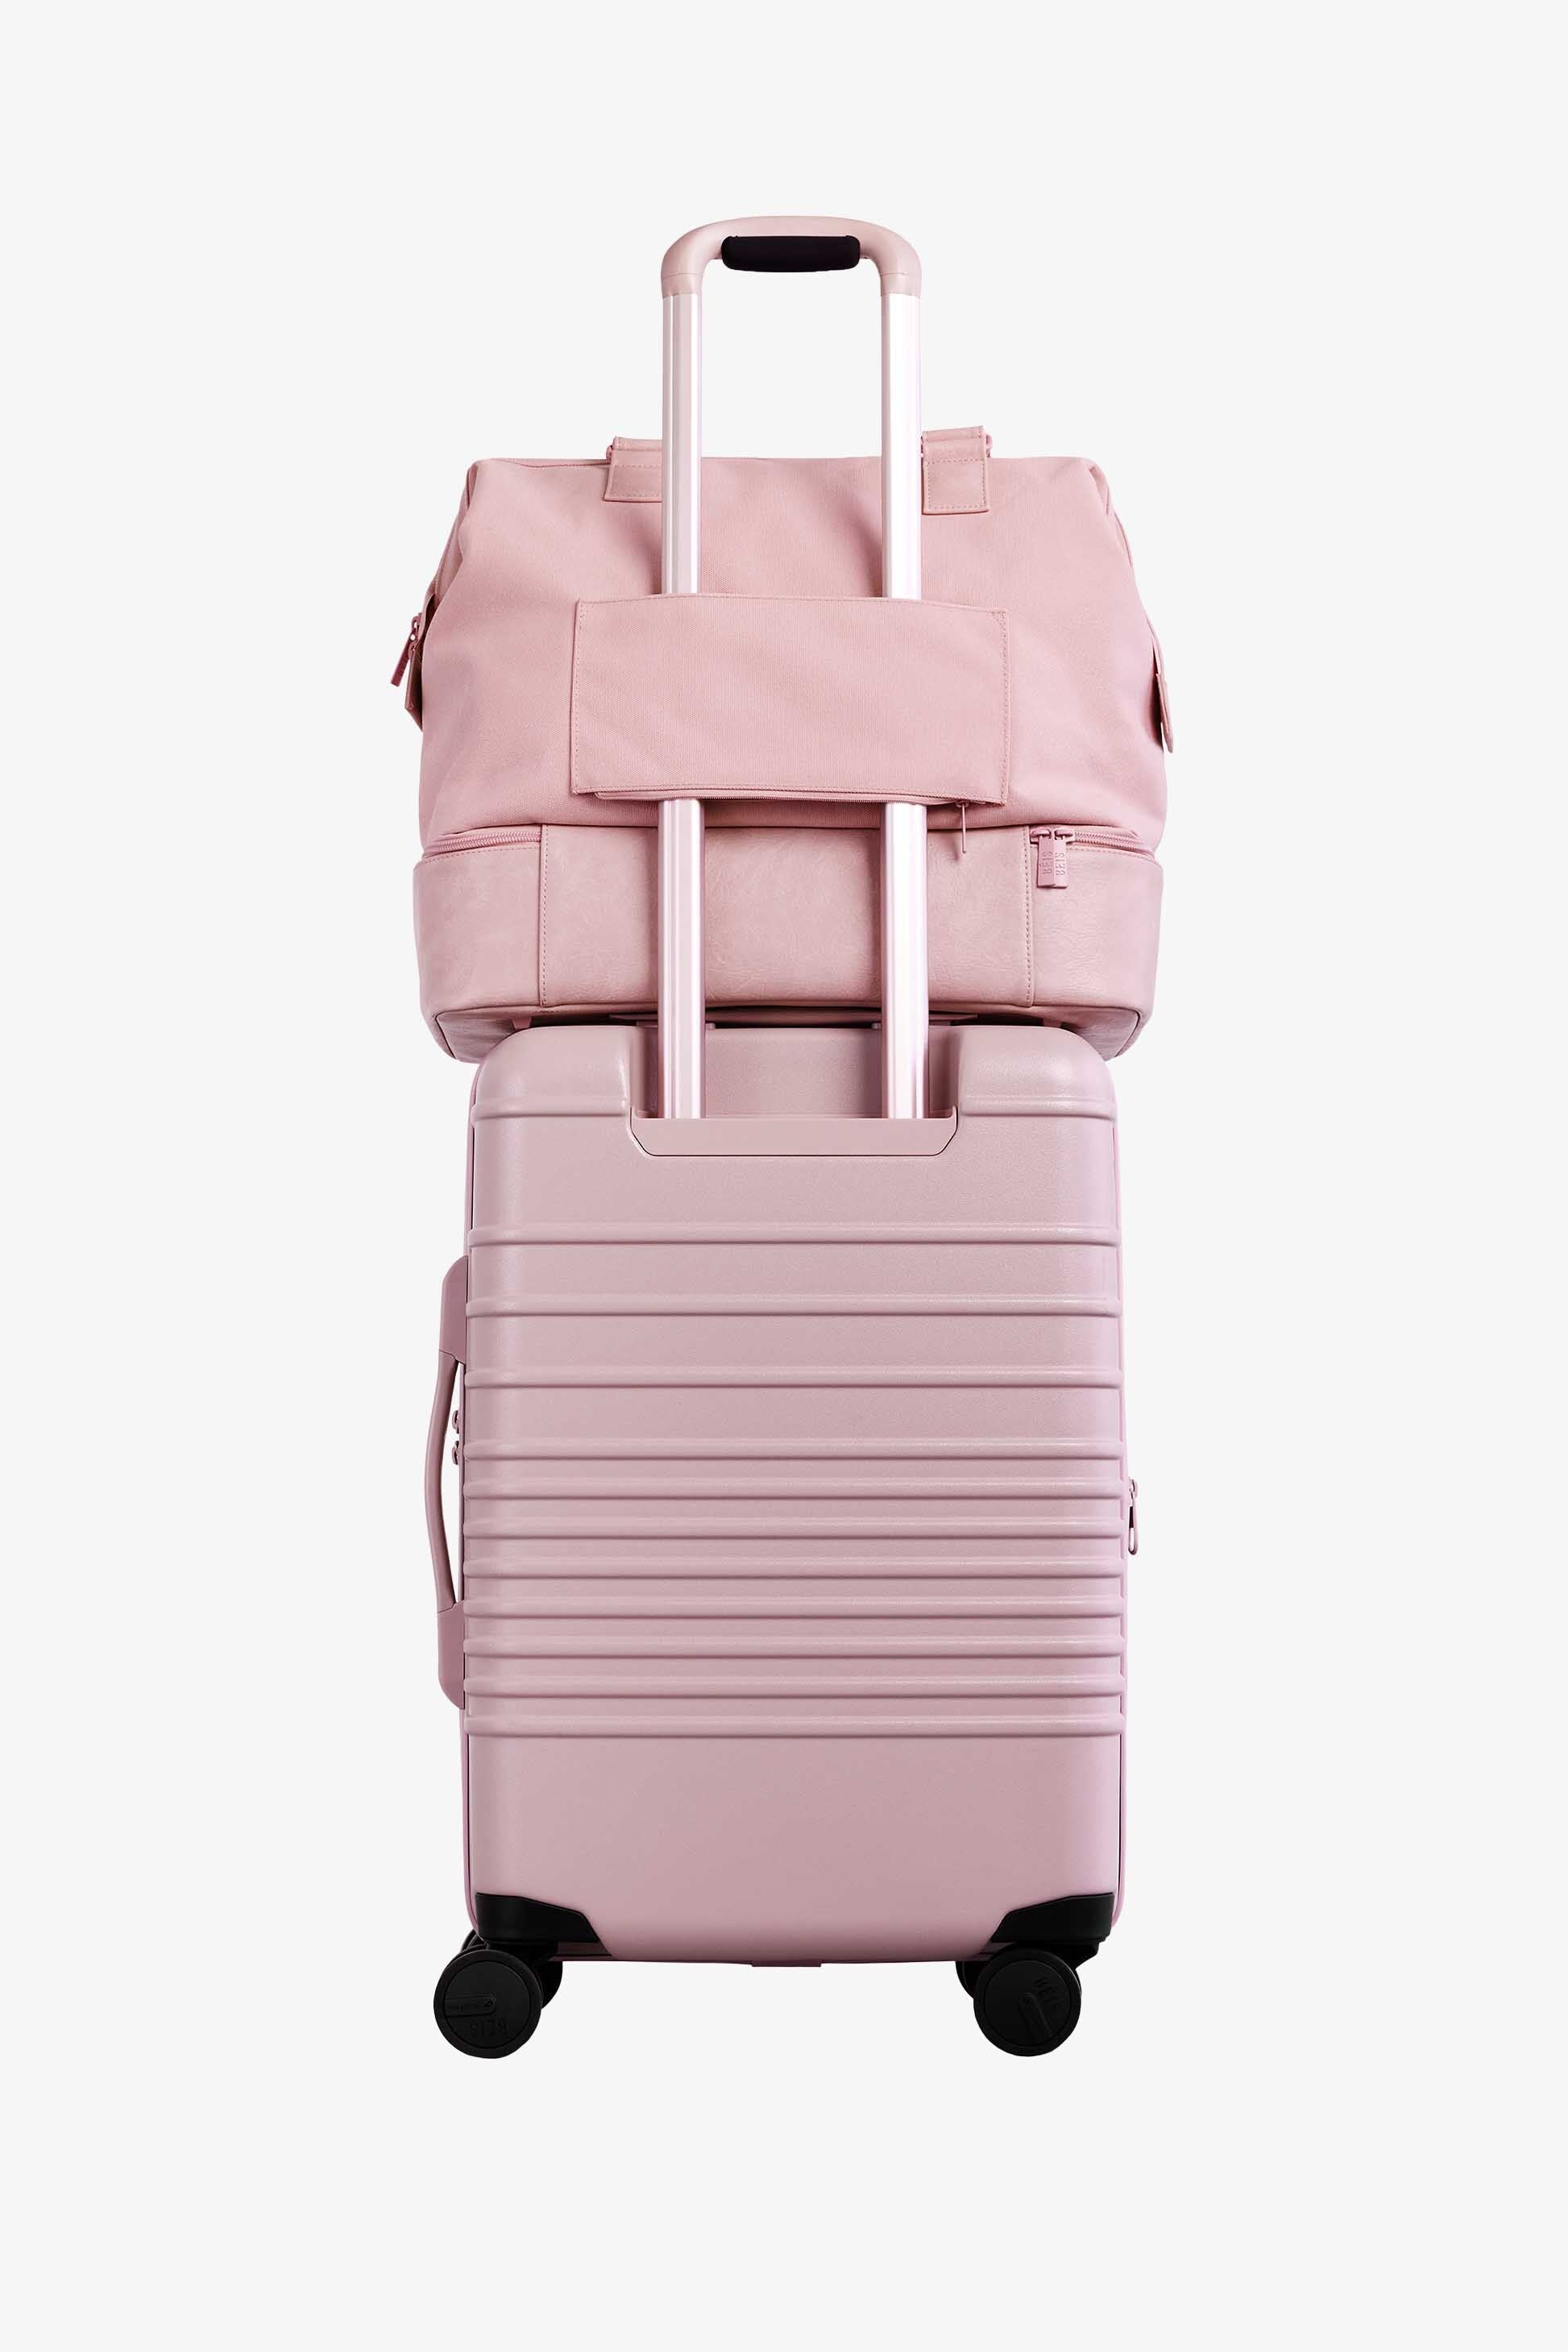 BÉIS 'The Carry-On Roller' in Atlas Pink - Pink 21 Carry On Roller & Hand  Luggage